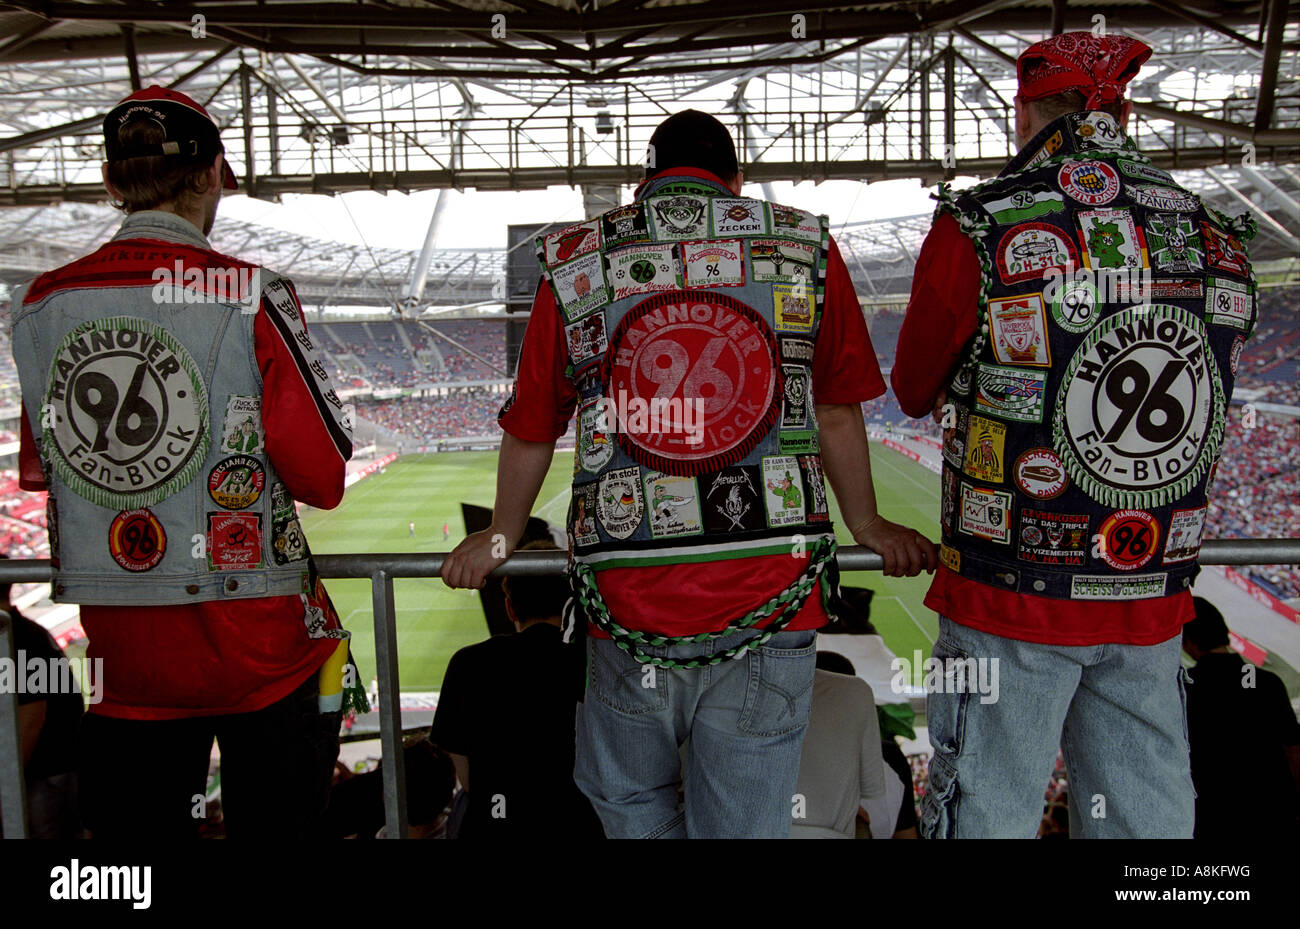 Supporters of Hannover 96 football club at the AWD Arena, Lower Saxony, Germany. Stock Photo